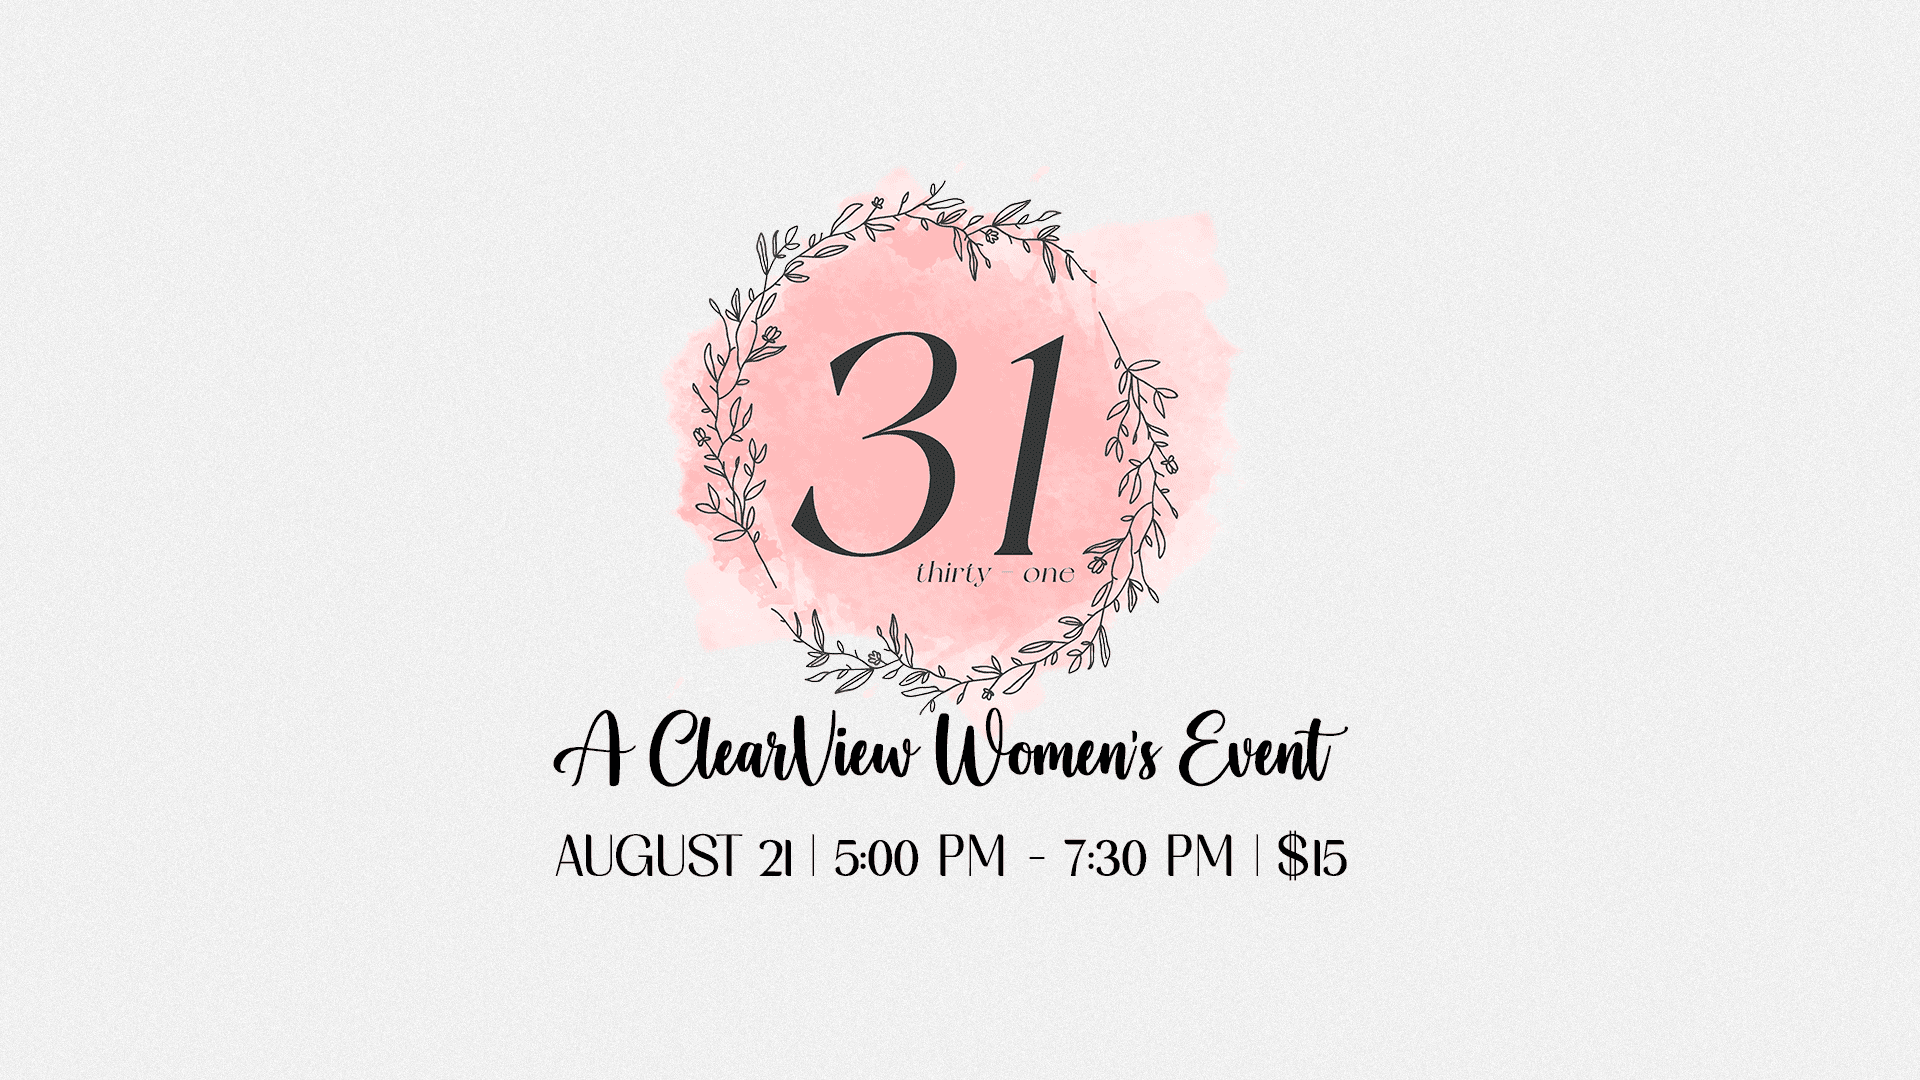 a simple wreathe graphic labeled 31 a clearview women's event august 21 5 to 7:30PM $15